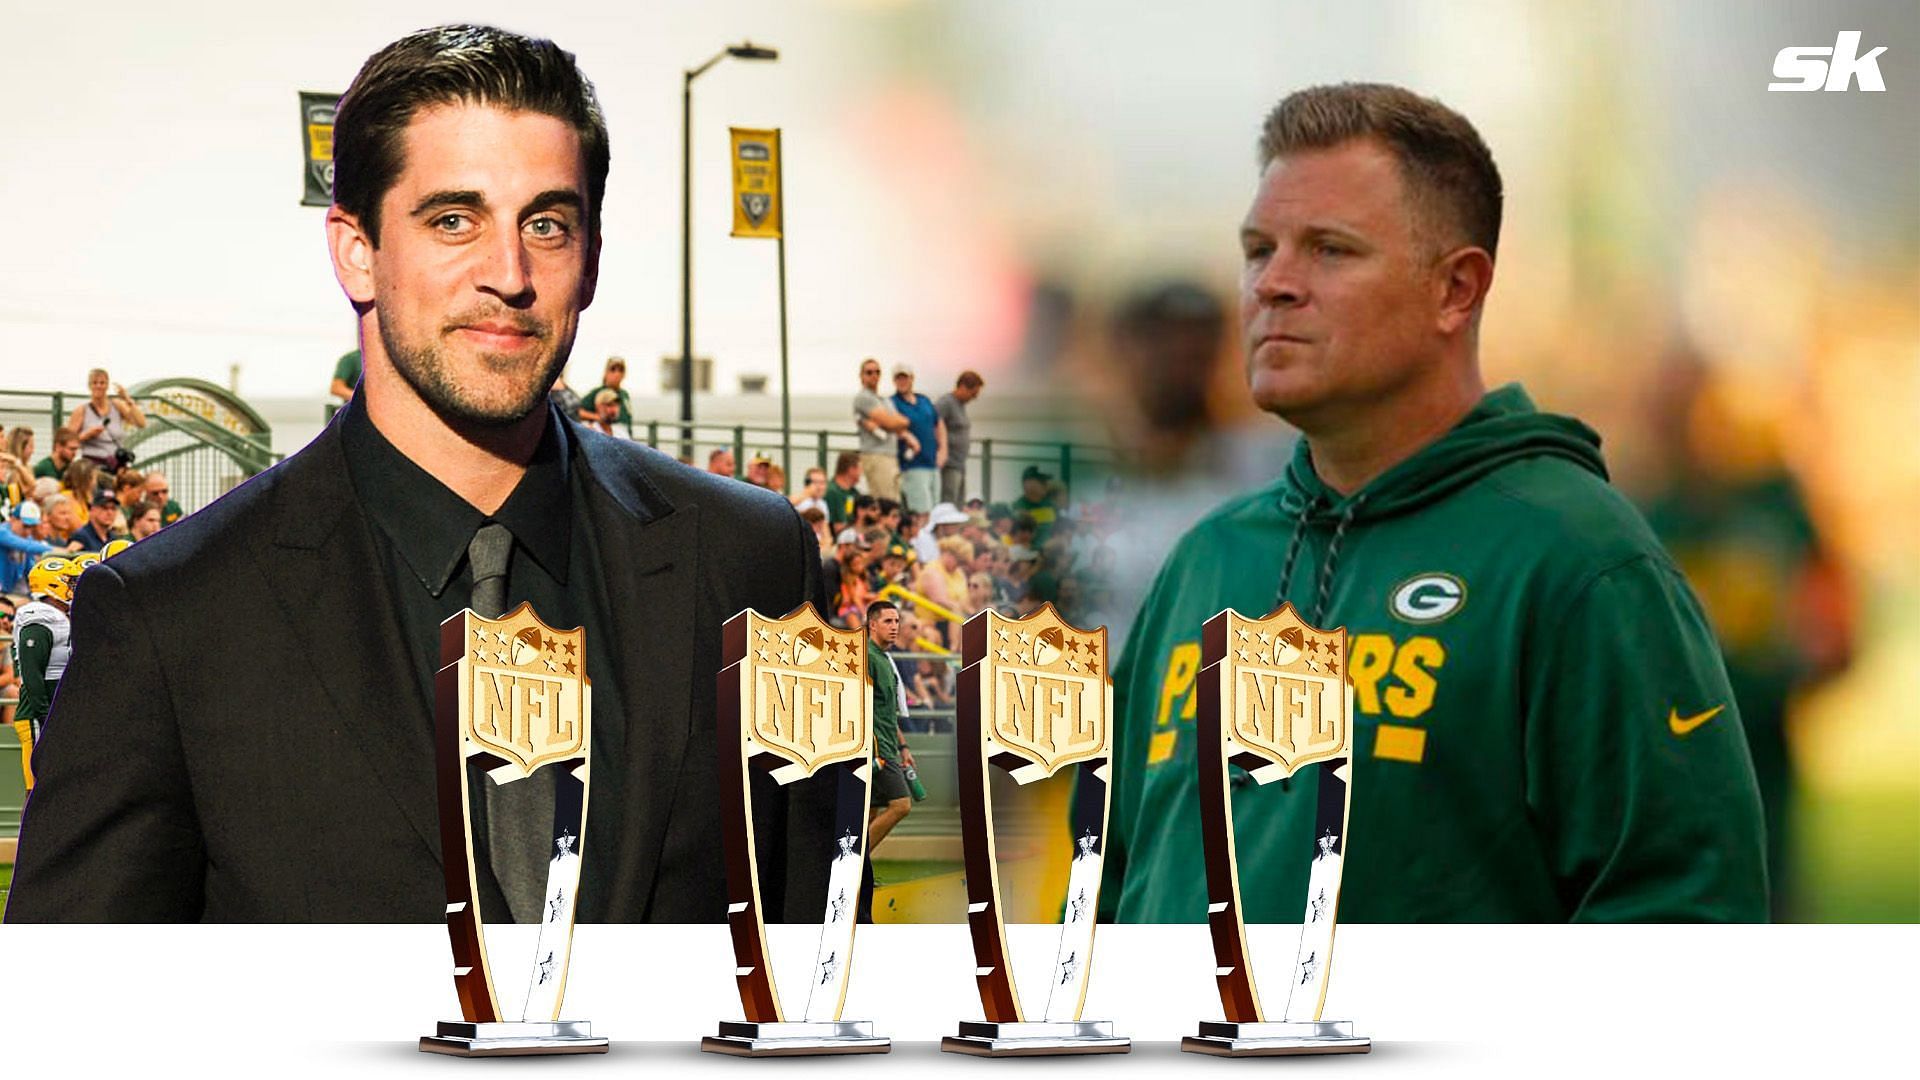 Aaron Rodgers takes shots at Packers GM for questioning his commitment